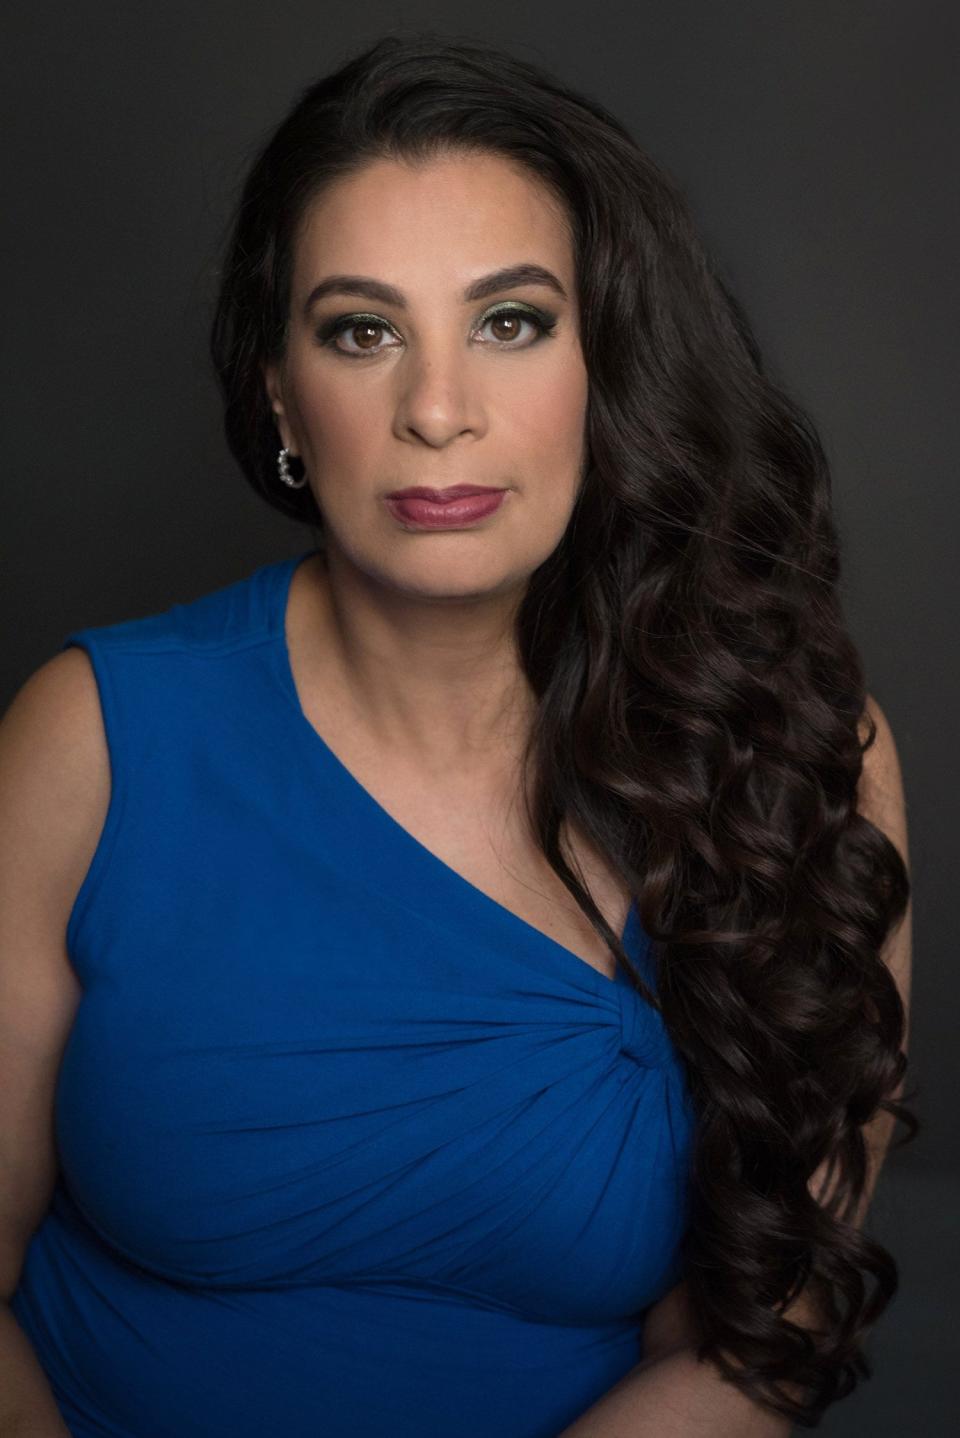 Palestinian-American comedian and disability advocate Maysoon Zayid says social media is like “the force” in Star Wars, with both a dark side and a light side.